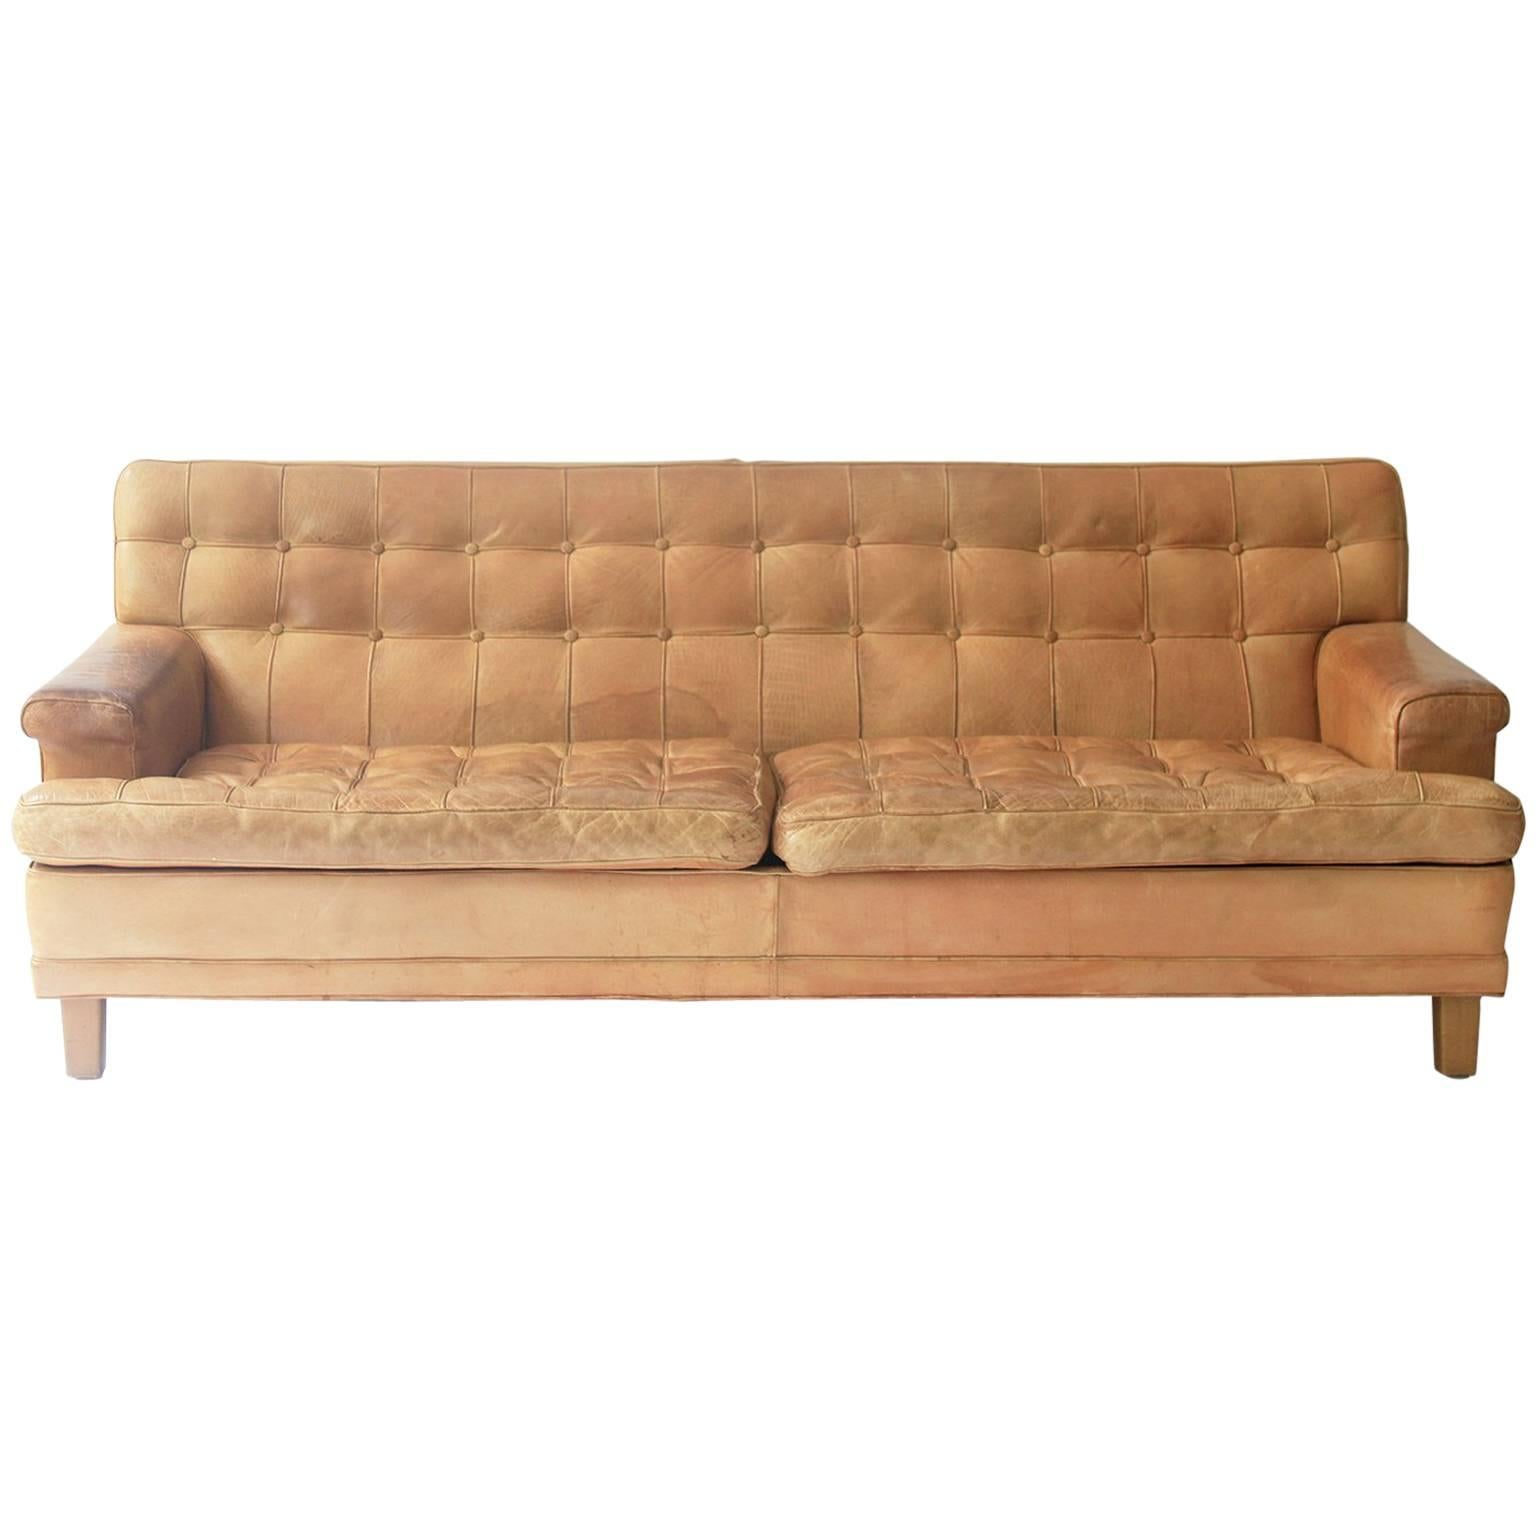 Arne Norell Merkur Sofa in Cognac Leather by Norell AB in Sweden For Sale